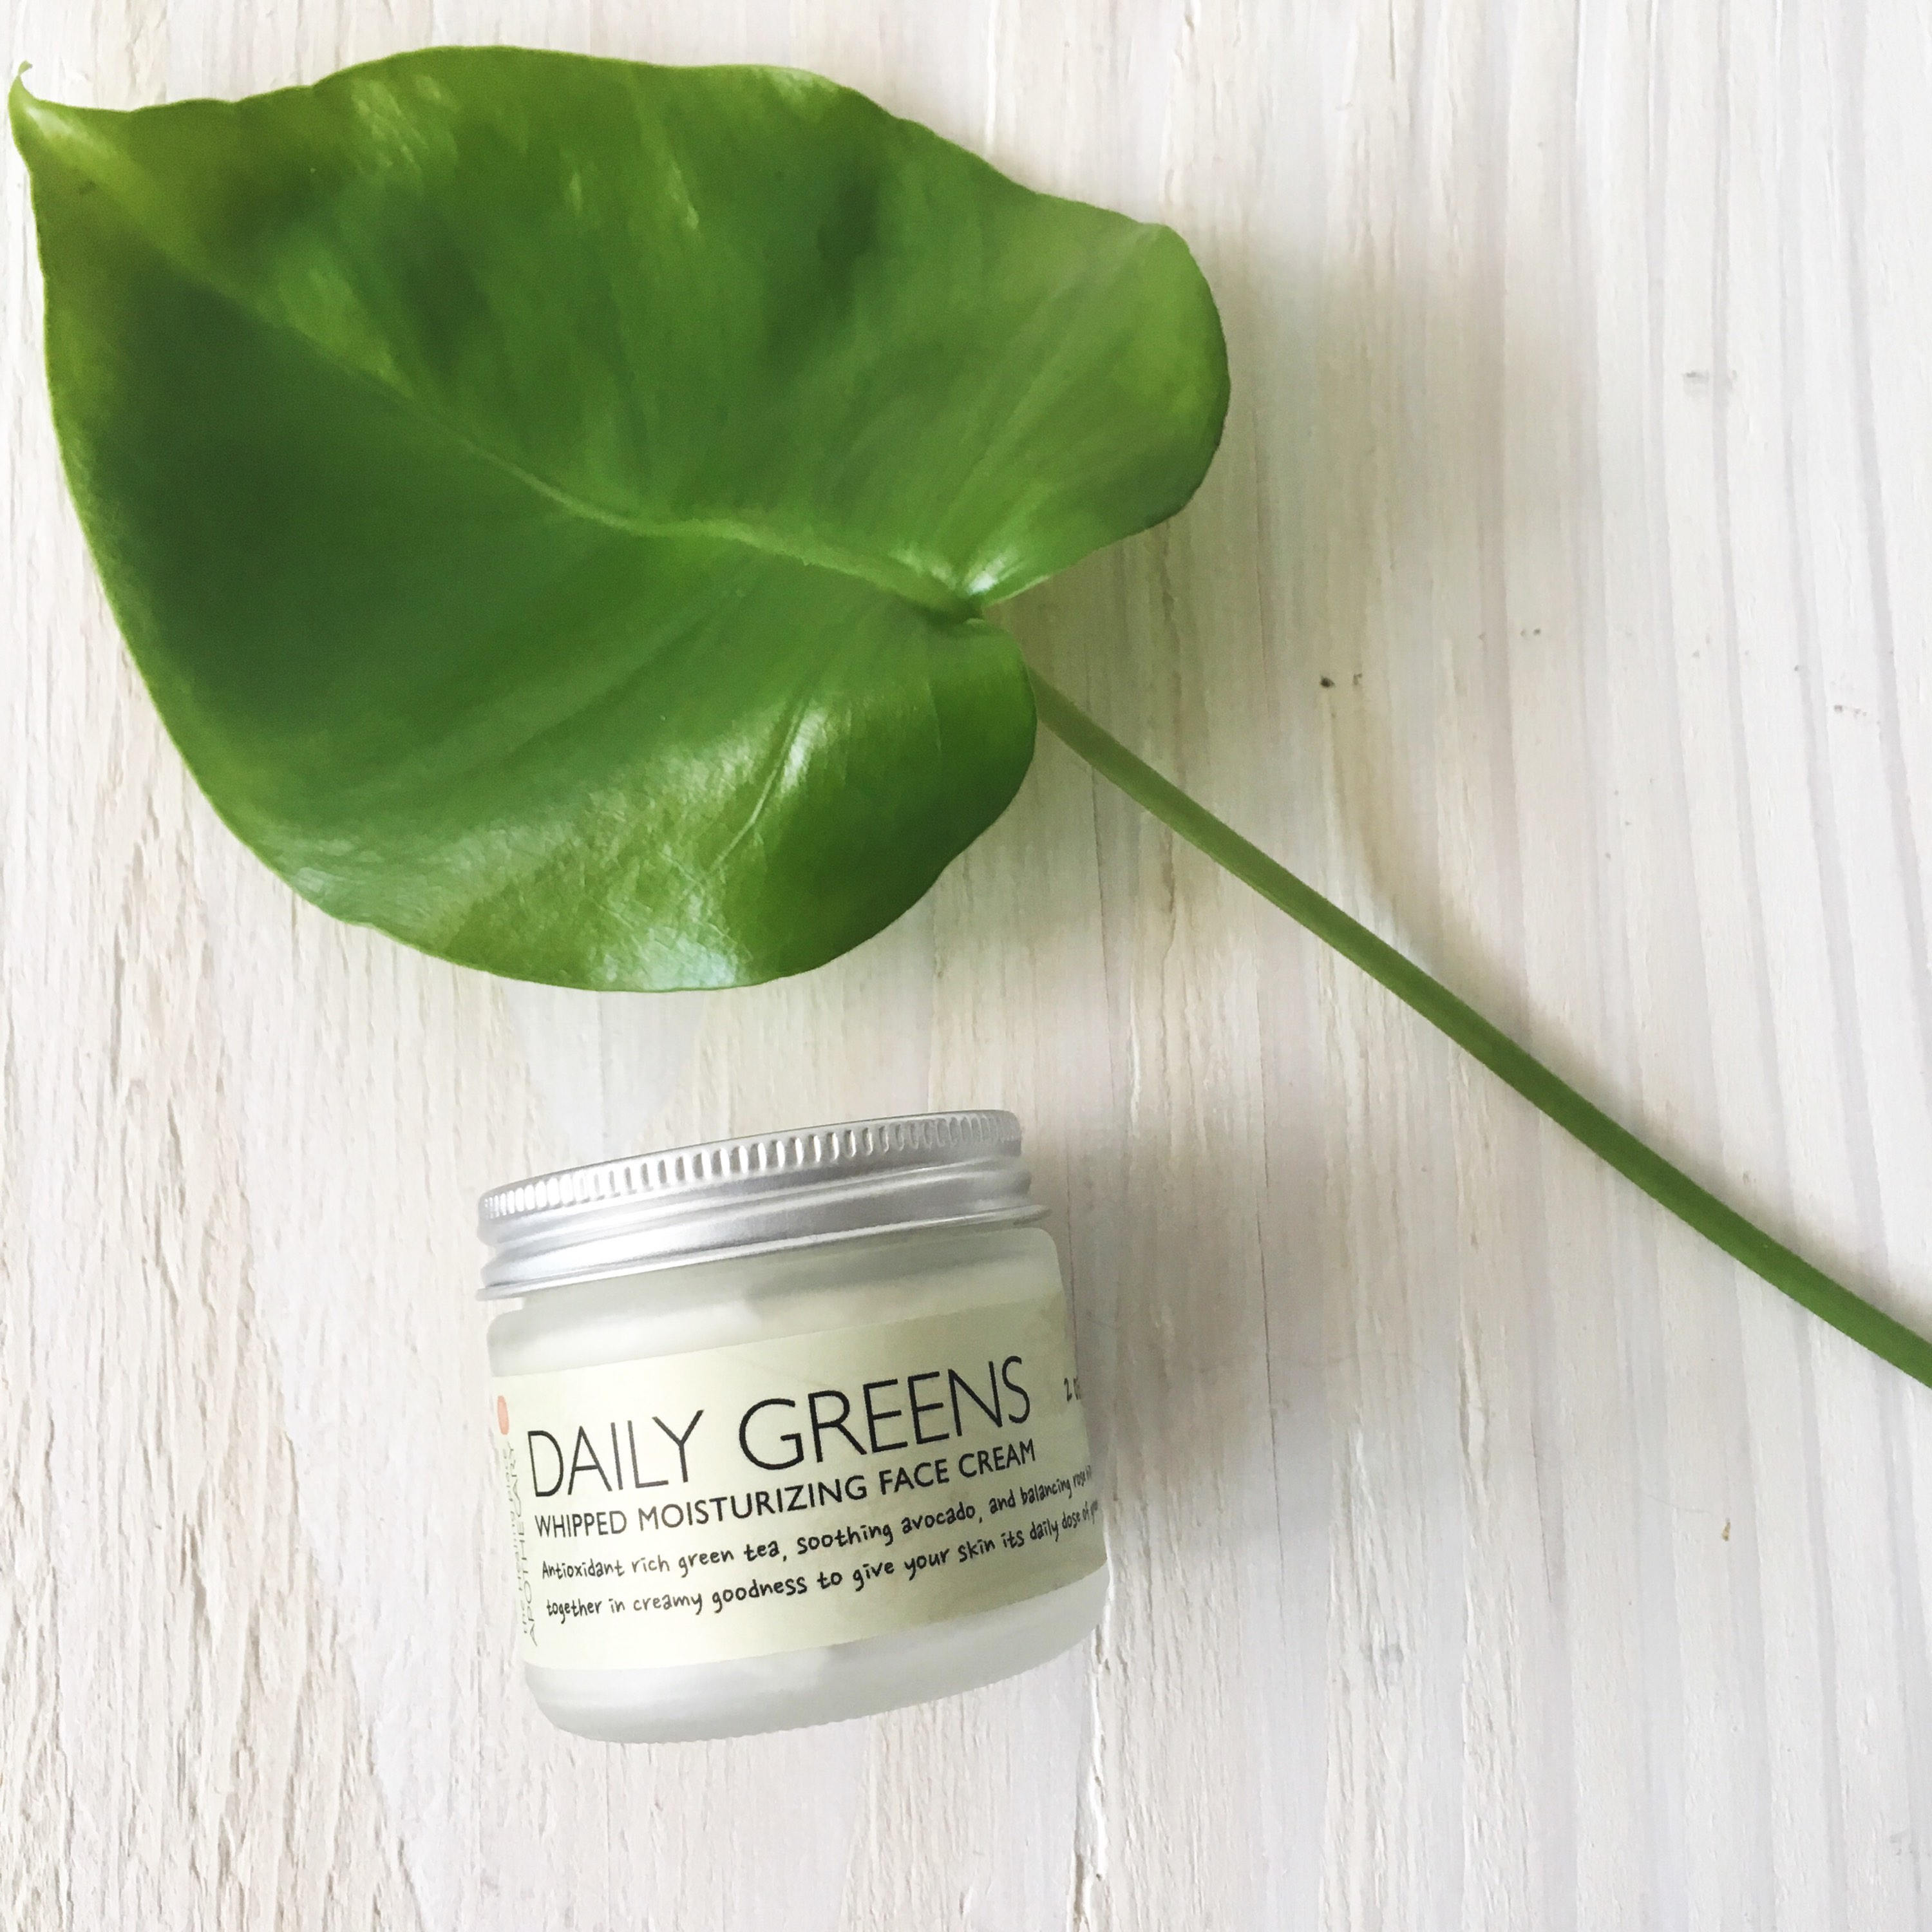 DAILY GREENS Whipped Moisturizing Cream Natural Skin Care